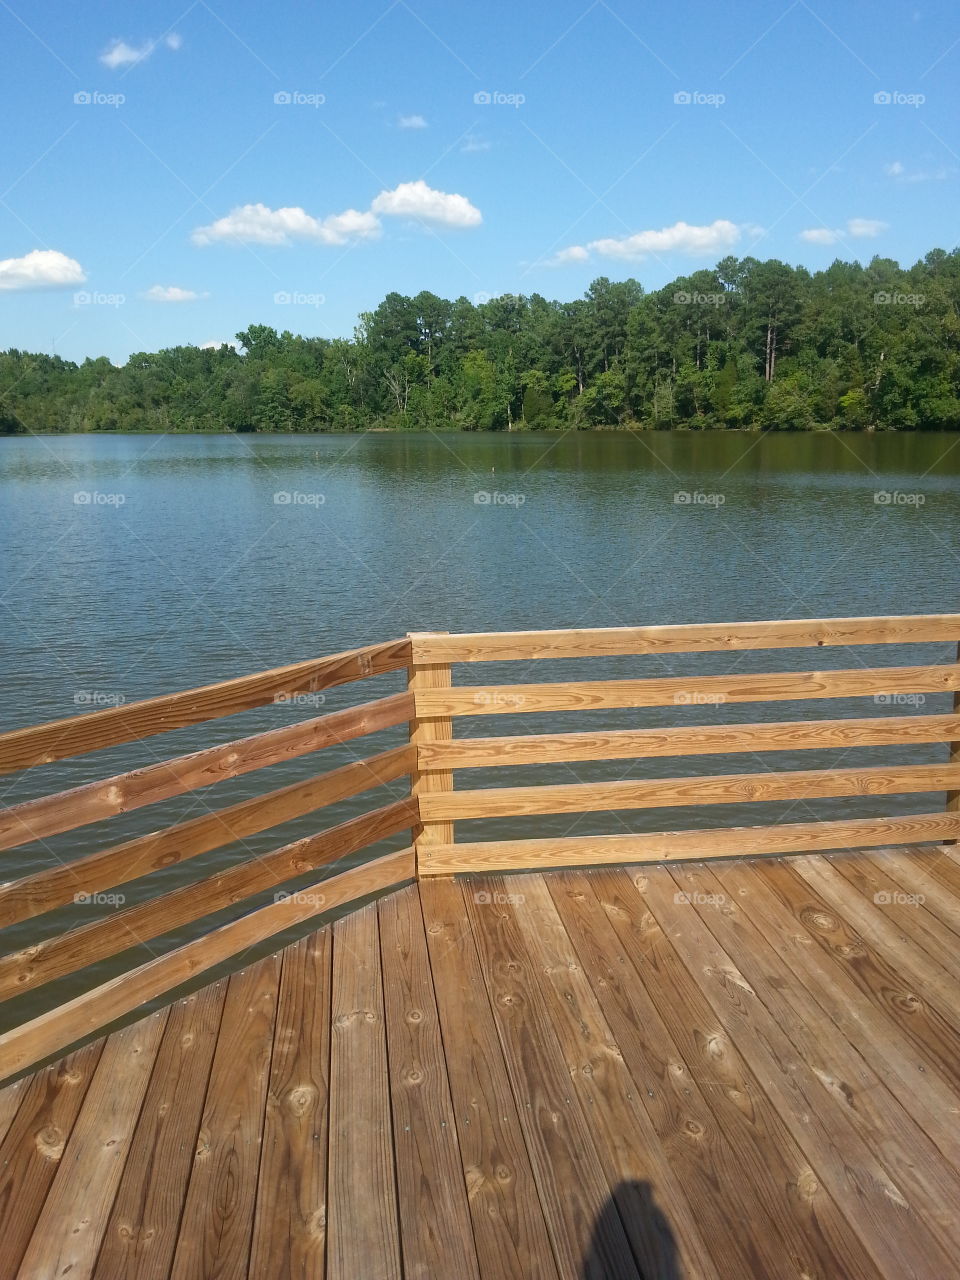 Wood, Wooden, Water, No Person, Deck